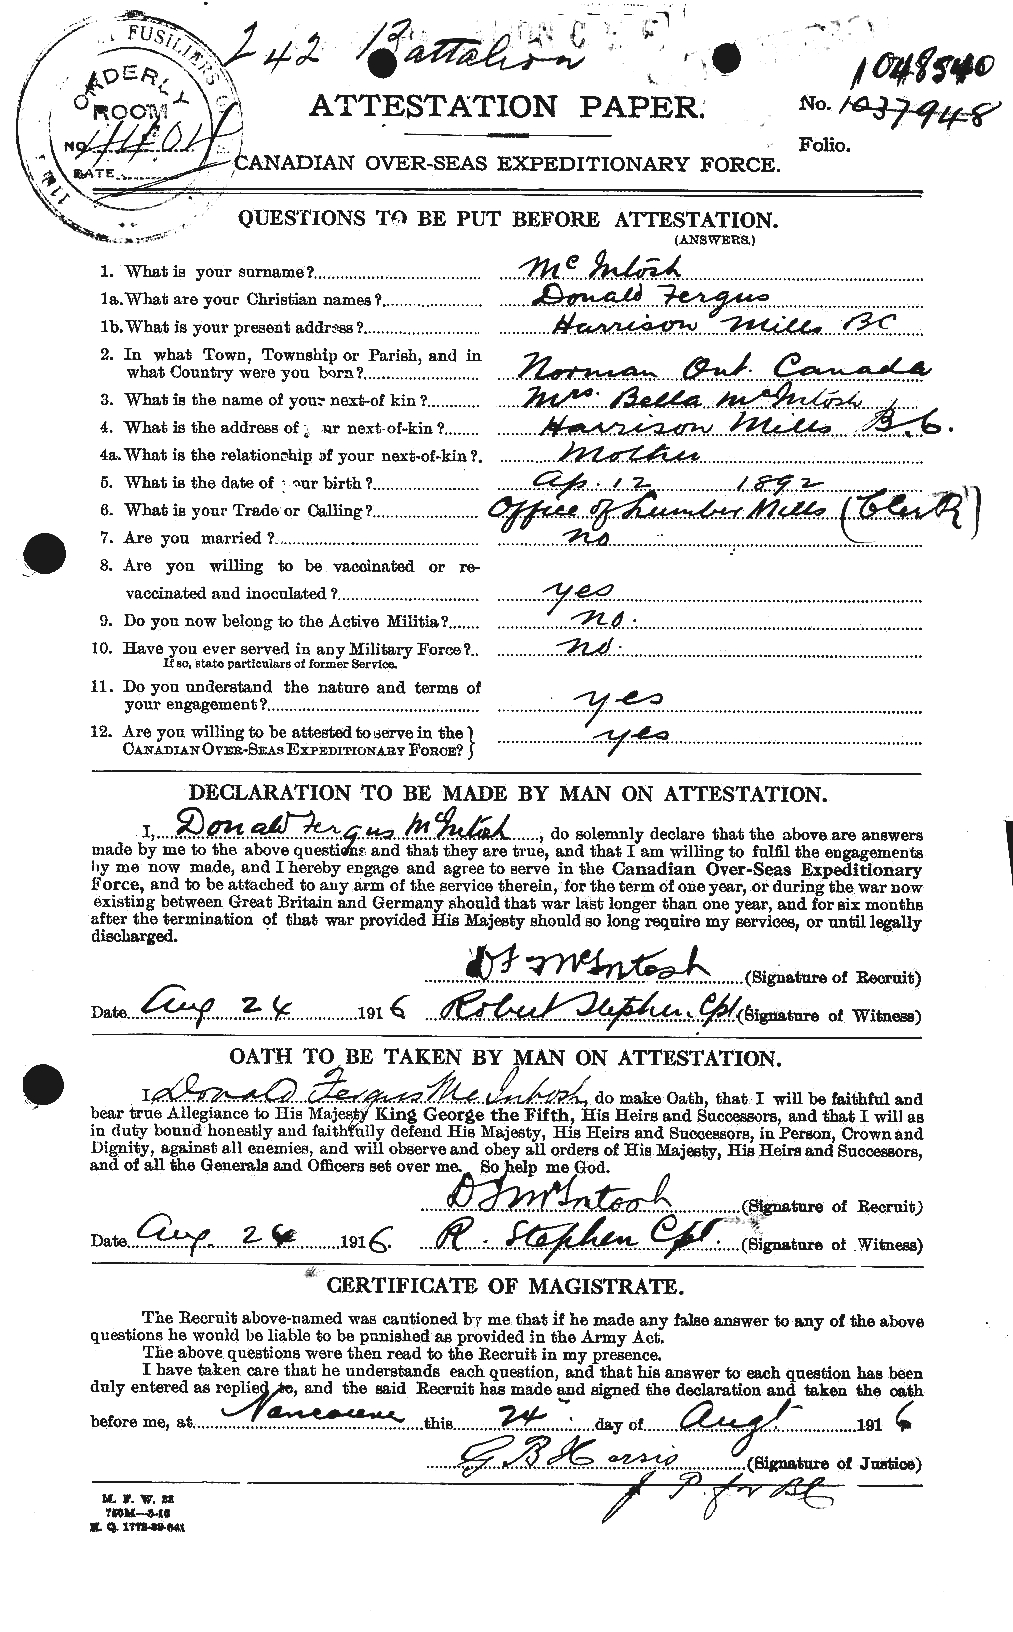 Personnel Records of the First World War - CEF 524873a